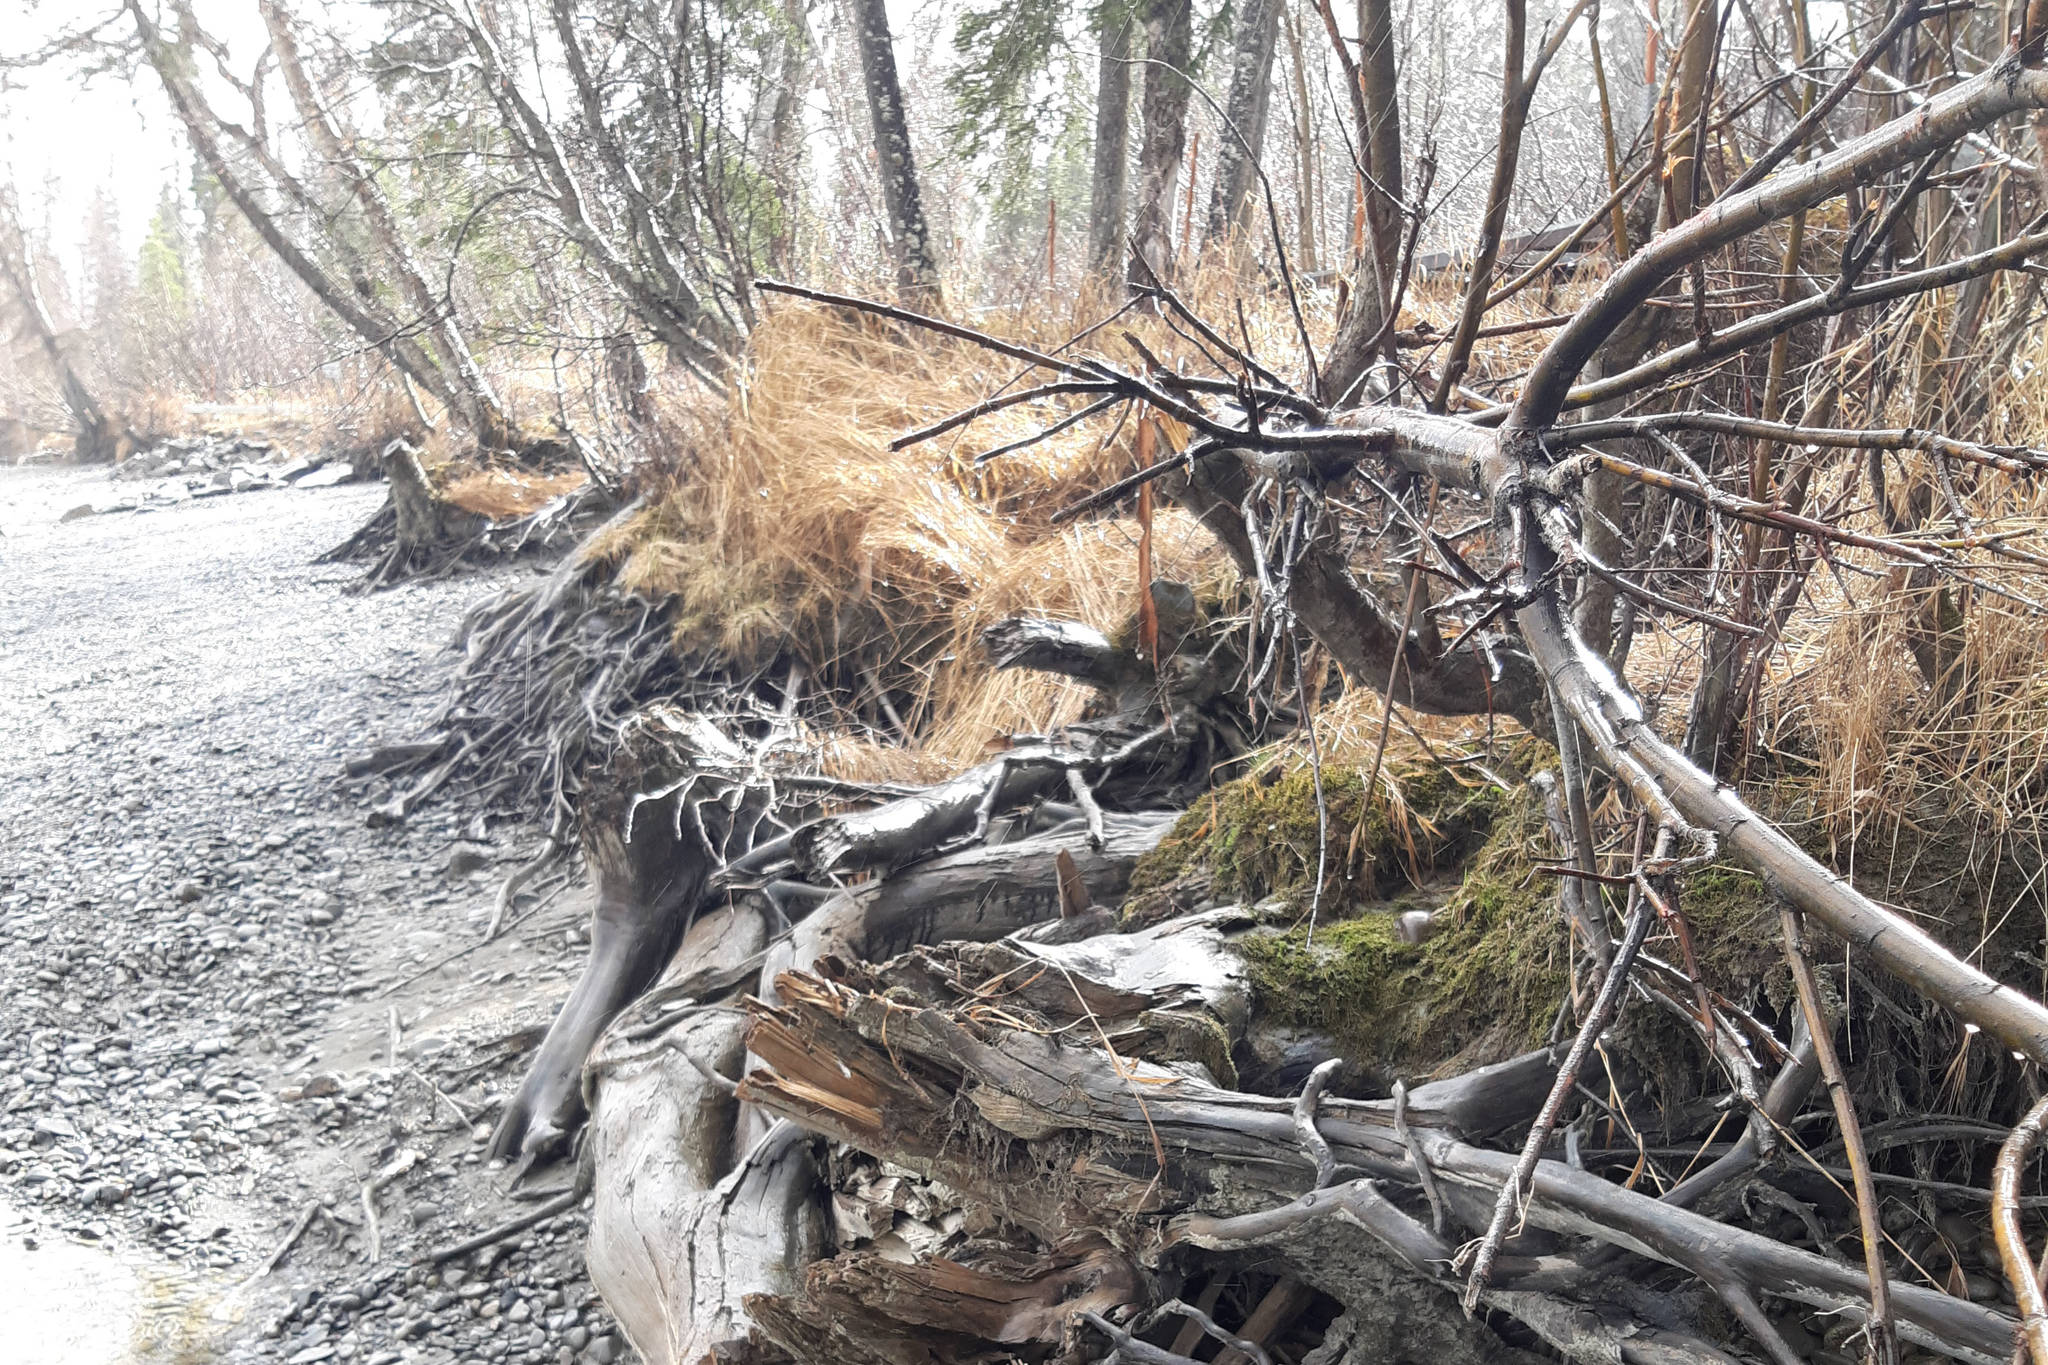 Spruce trees that were placed along the Kenai River for revetment several years ago are seen here in Kenai, Alaska on April 12, 2019. (Photo by Brian Mazurek/Peninsula Clarion)